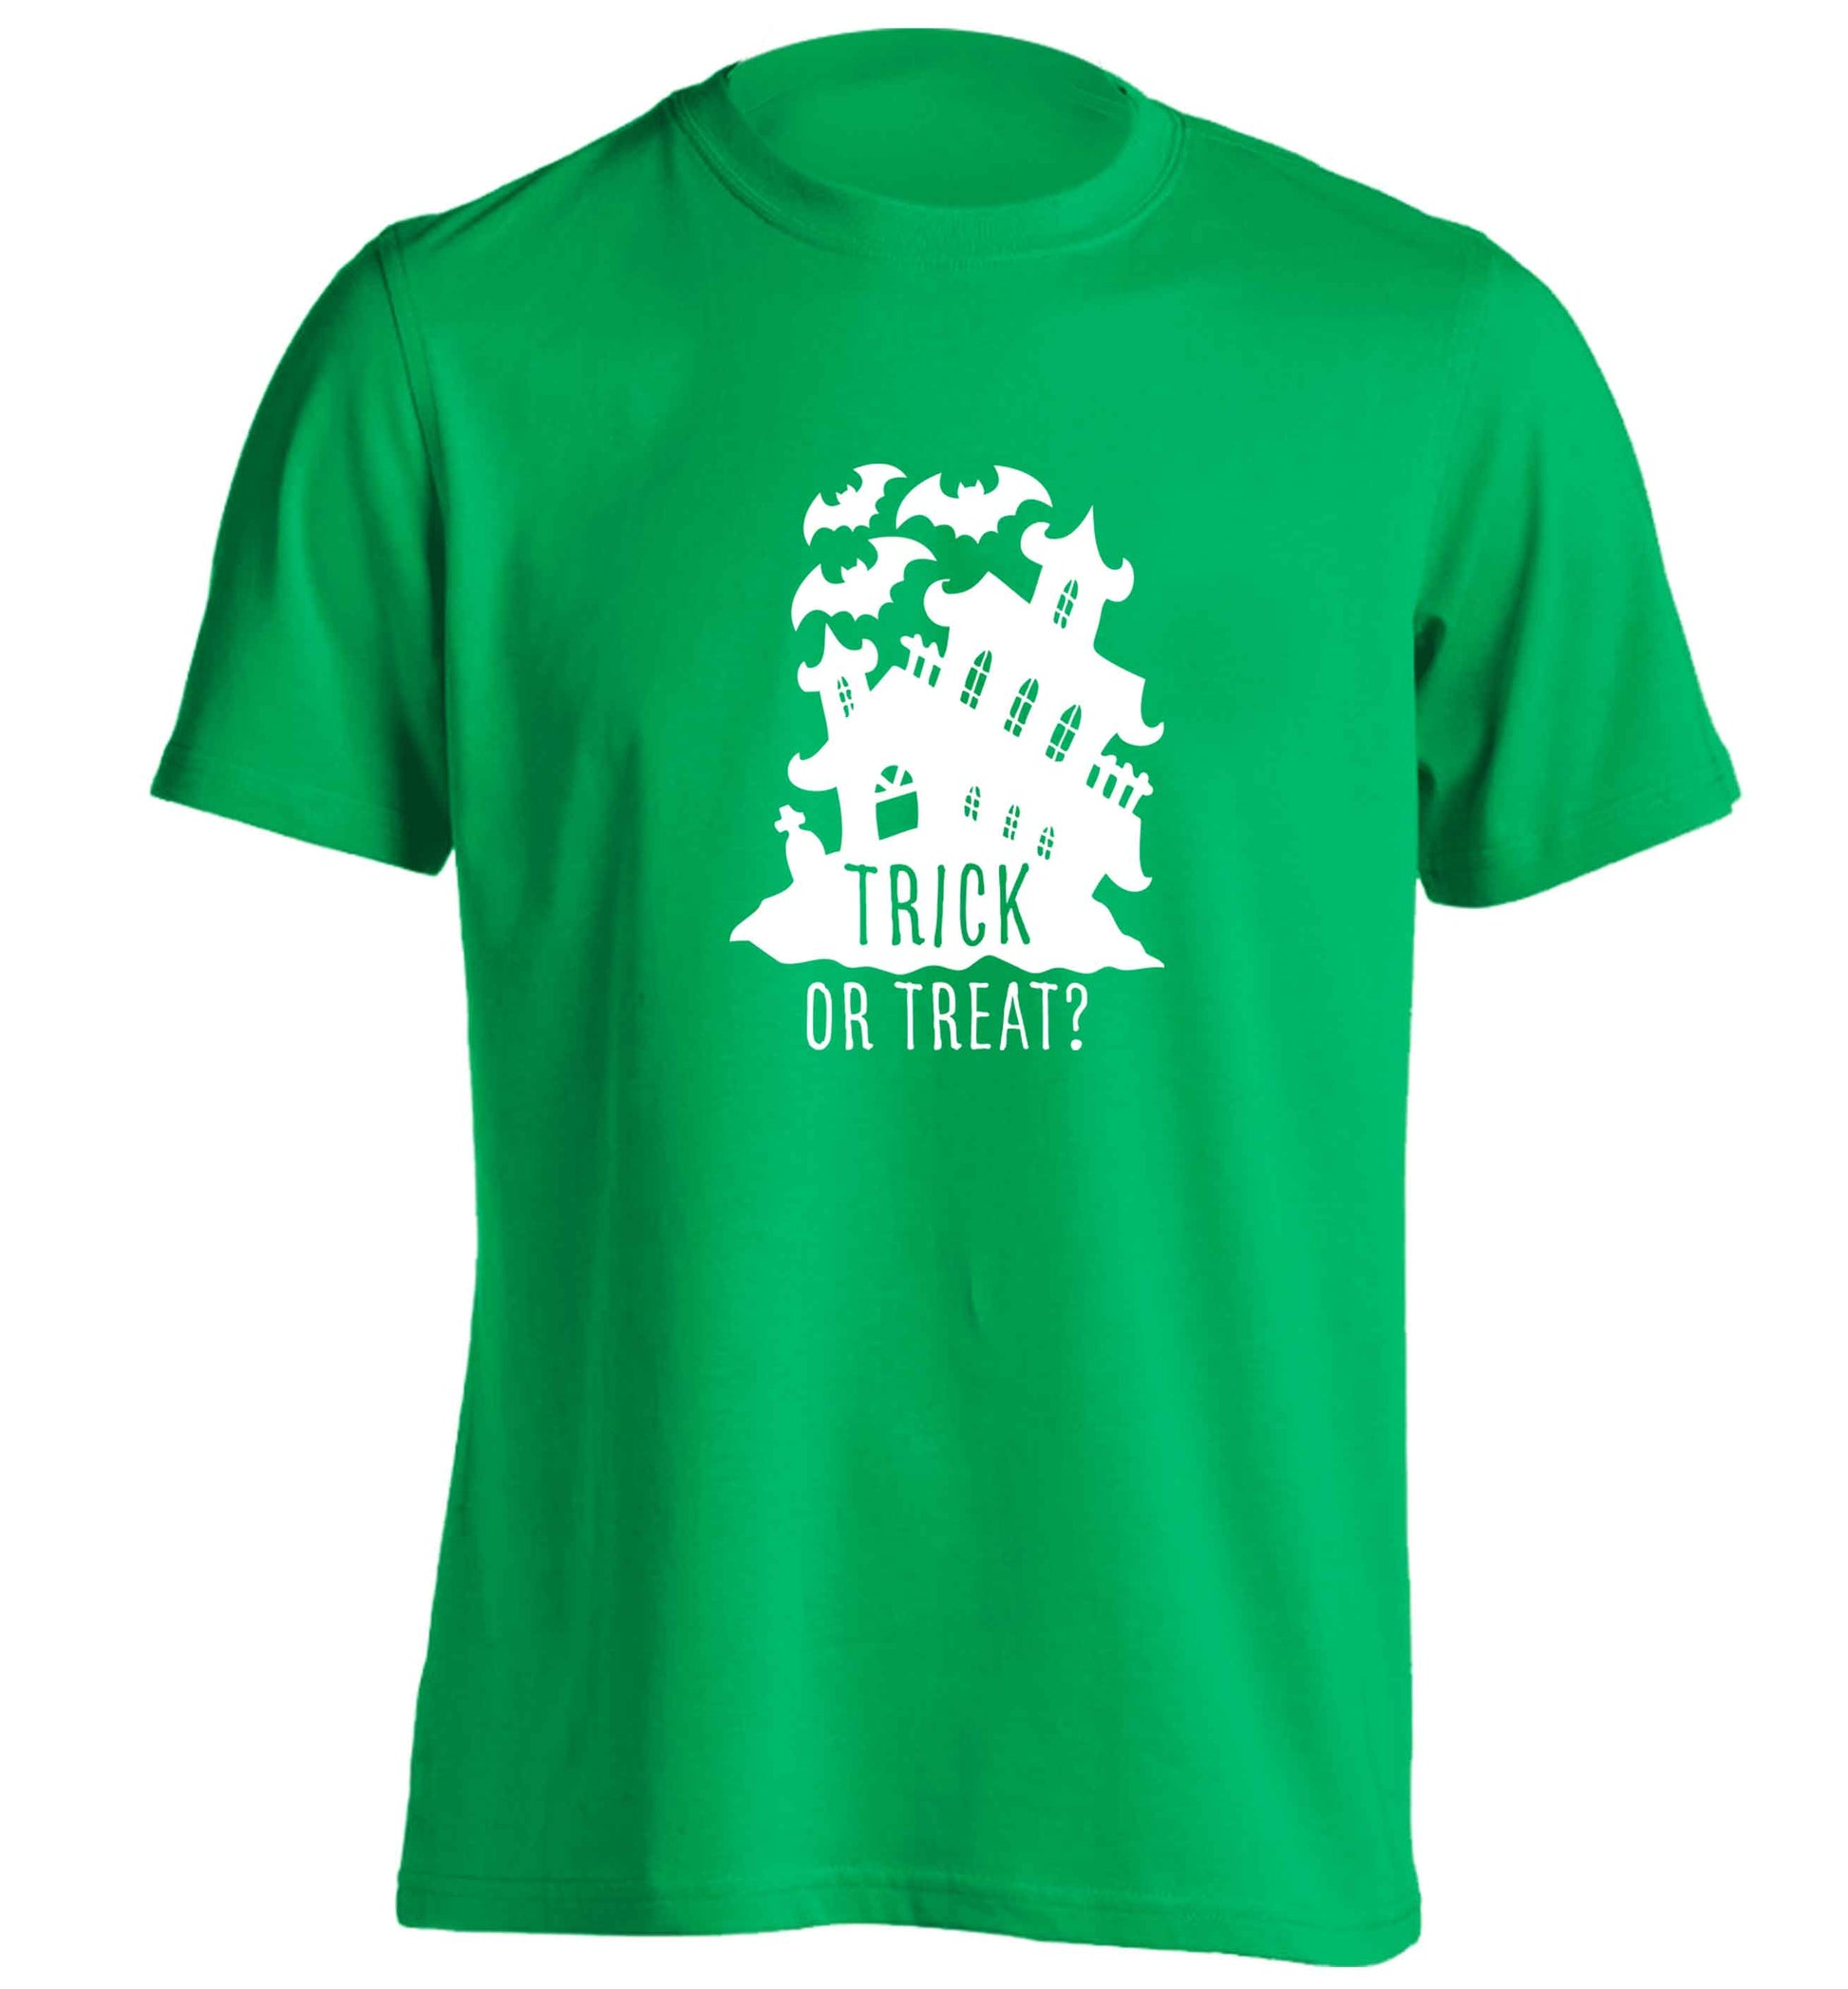 Trick or treat - haunted house adults unisex green Tshirt 2XL